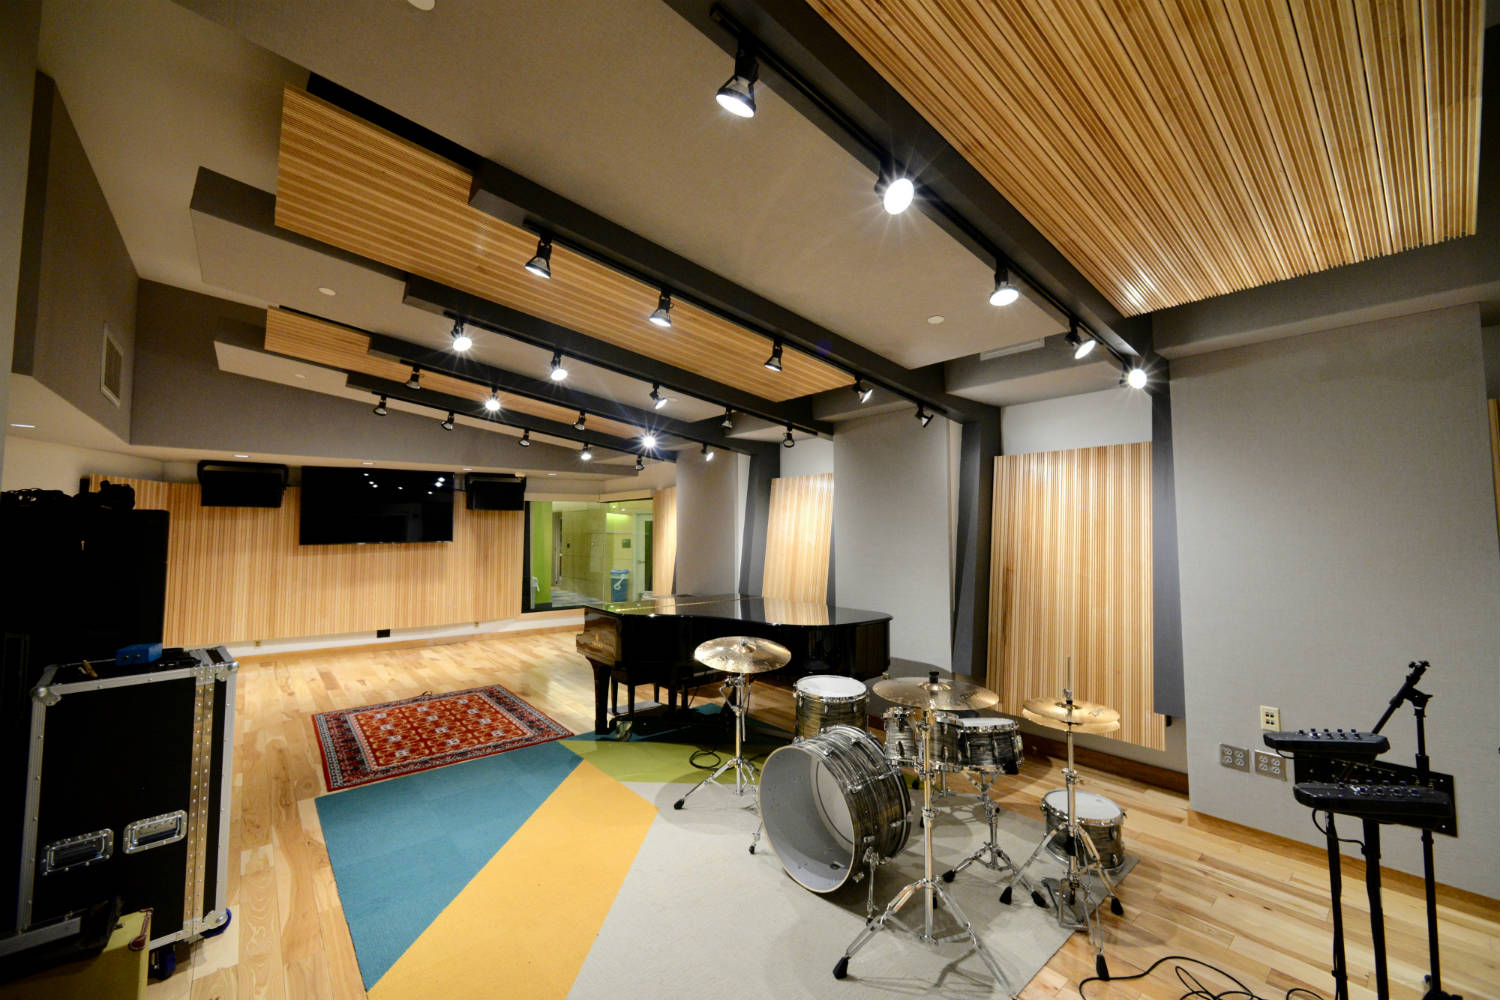 Drexel University in Philadelphia, PA is one of America's 15 largest universities. Their brand-new recording facilities, designed by the WSDG team, expands their music and recording program. Live Room